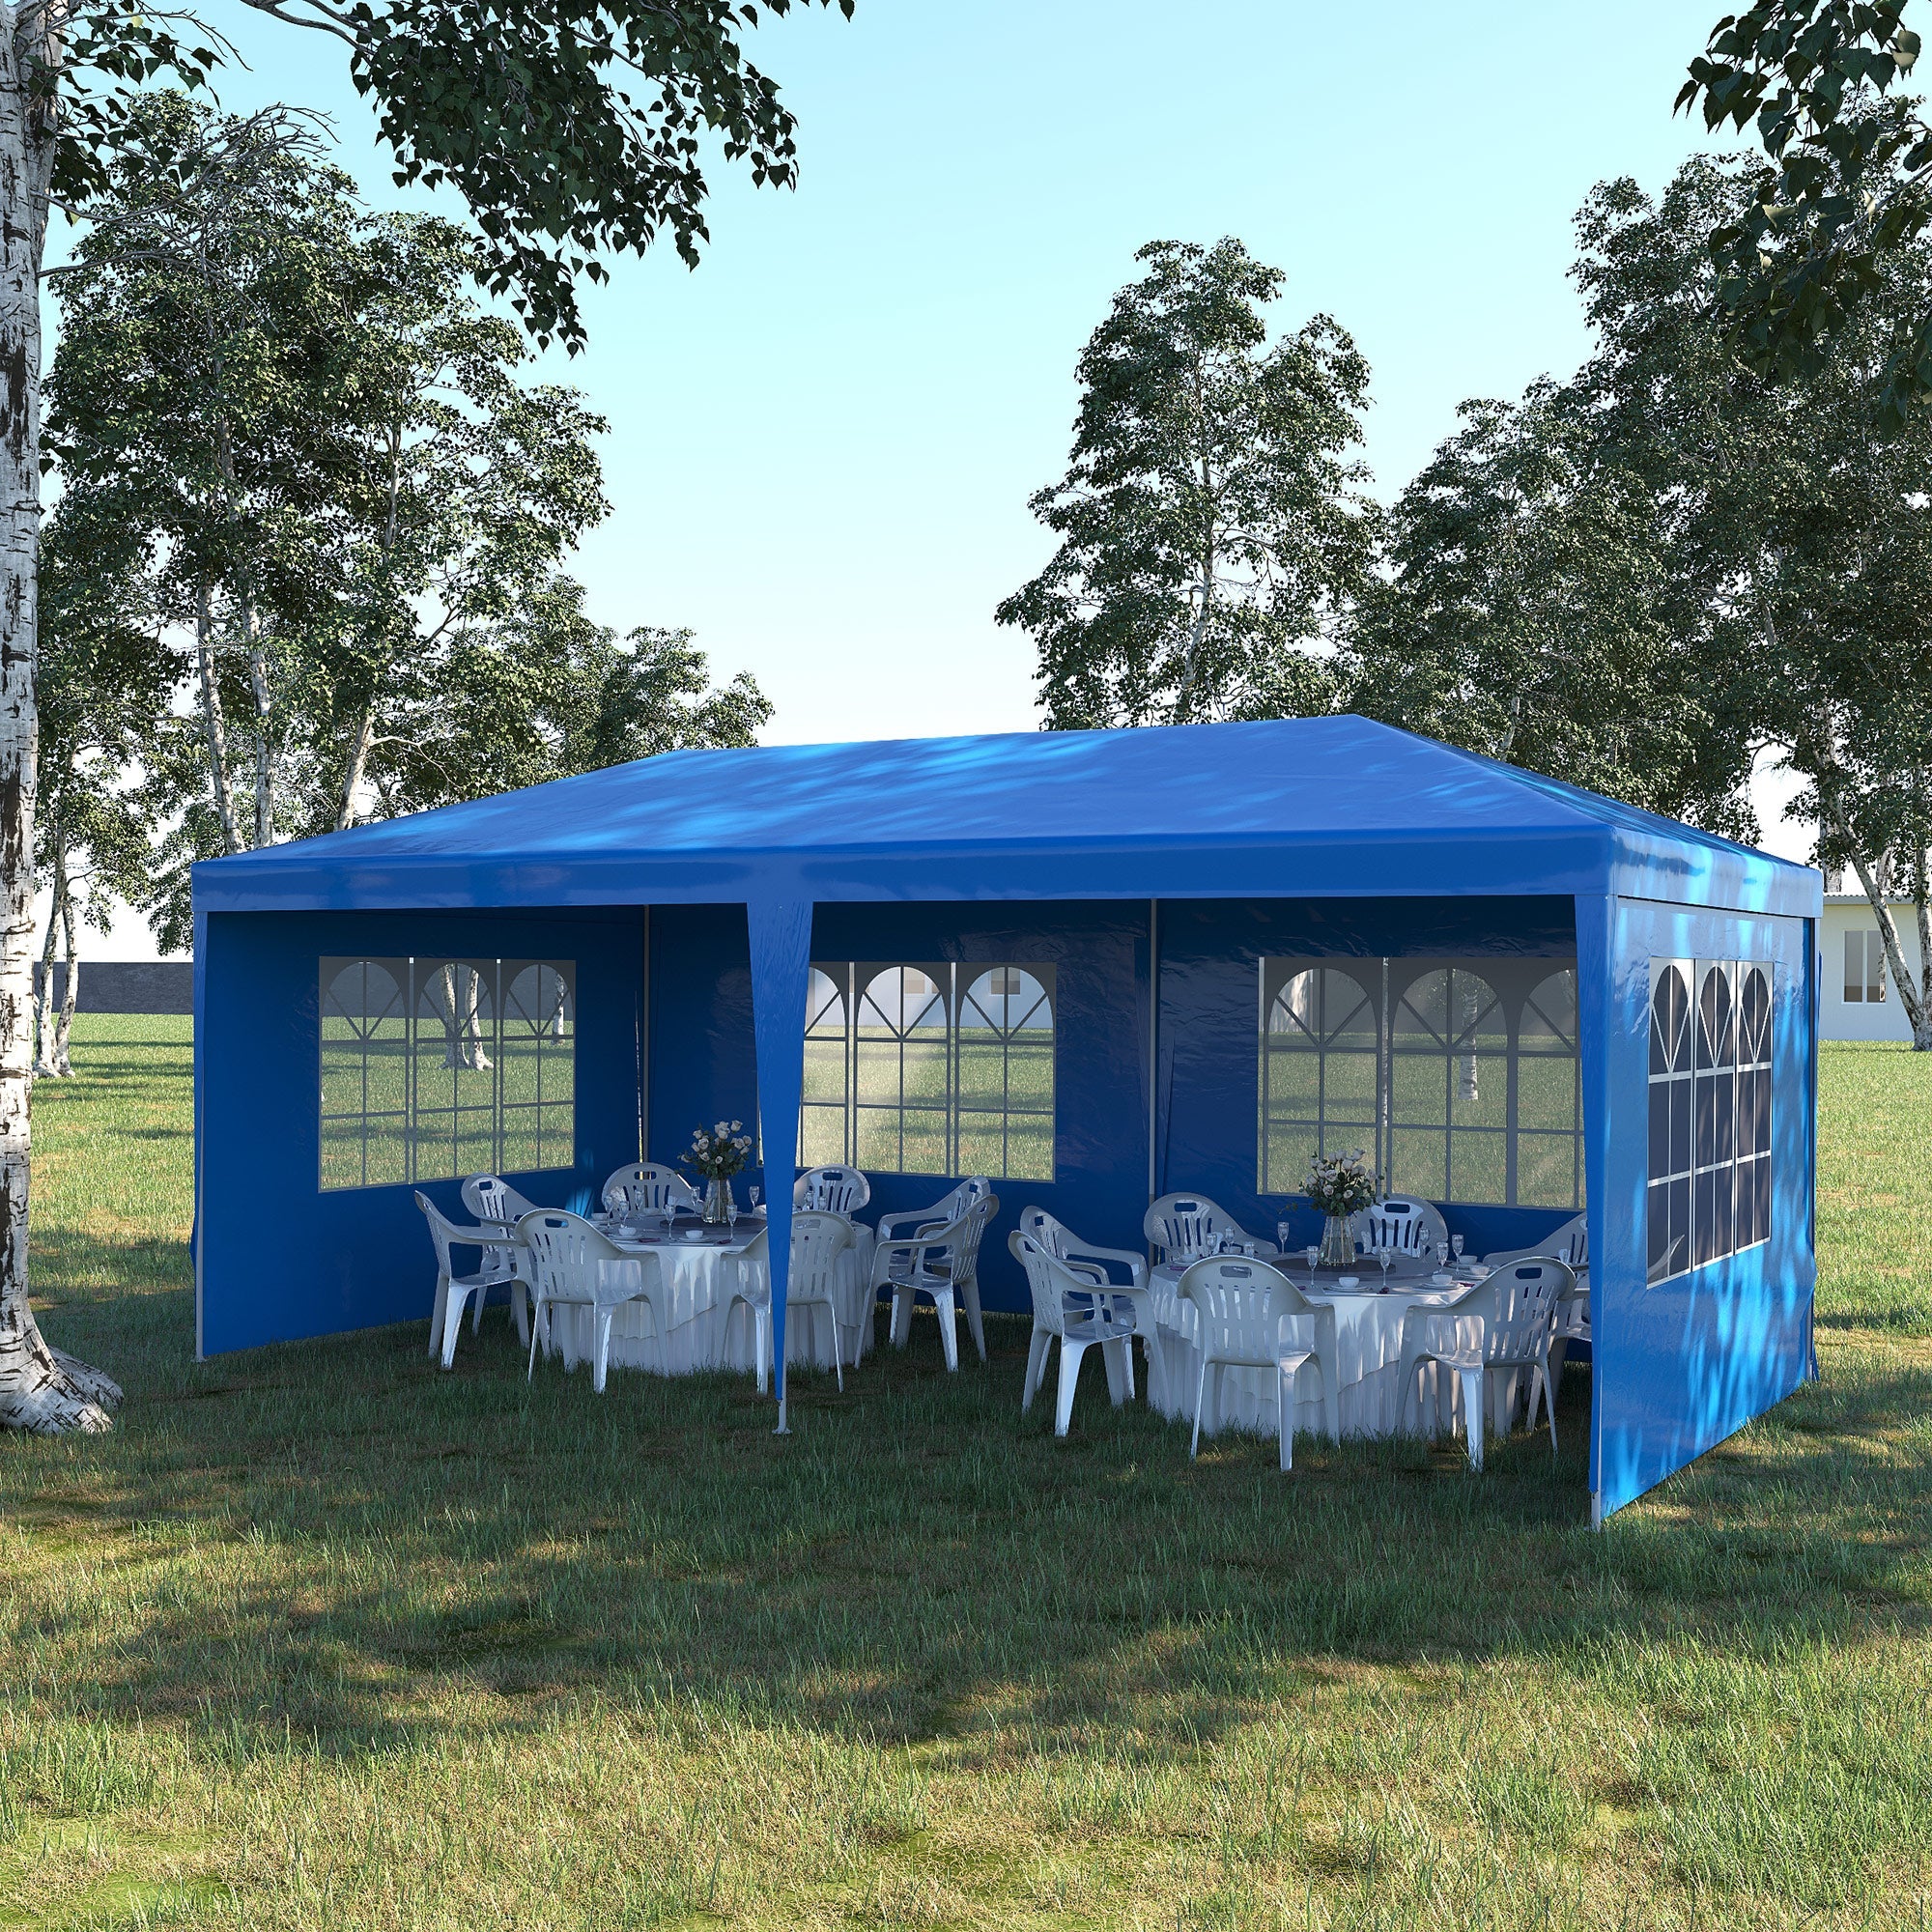 Outsunny Large 10' x 20' Party Tent, Events Shelter Canopy Gazebo with 4 Removable Side Walls for Weddings, Picnic, Blue